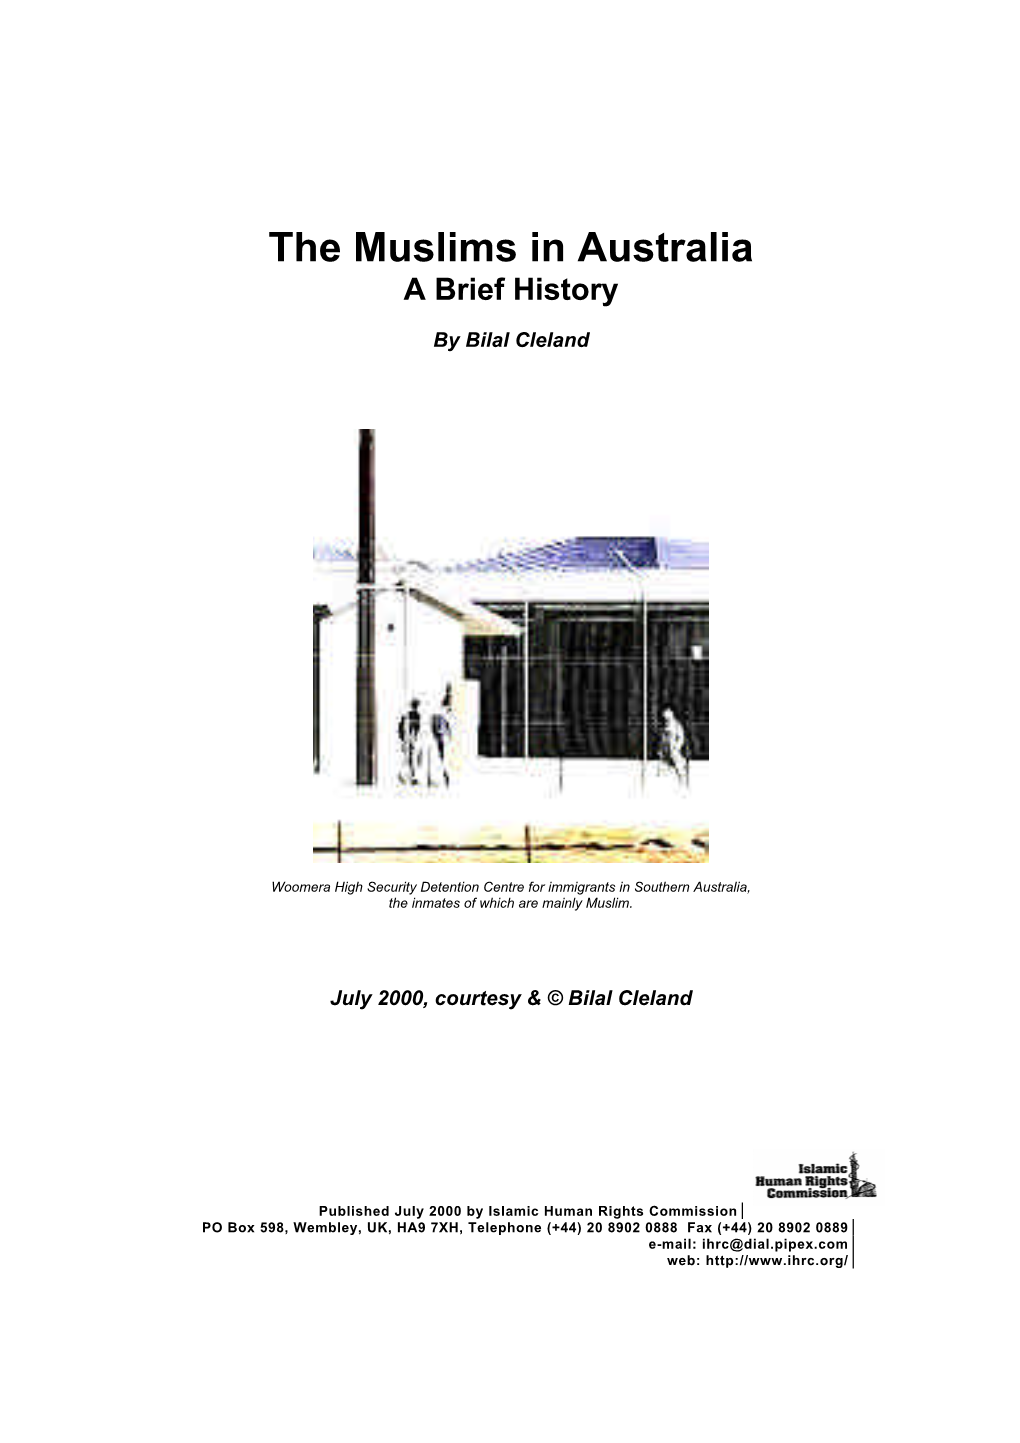 The Muslims in Australia a Brief History